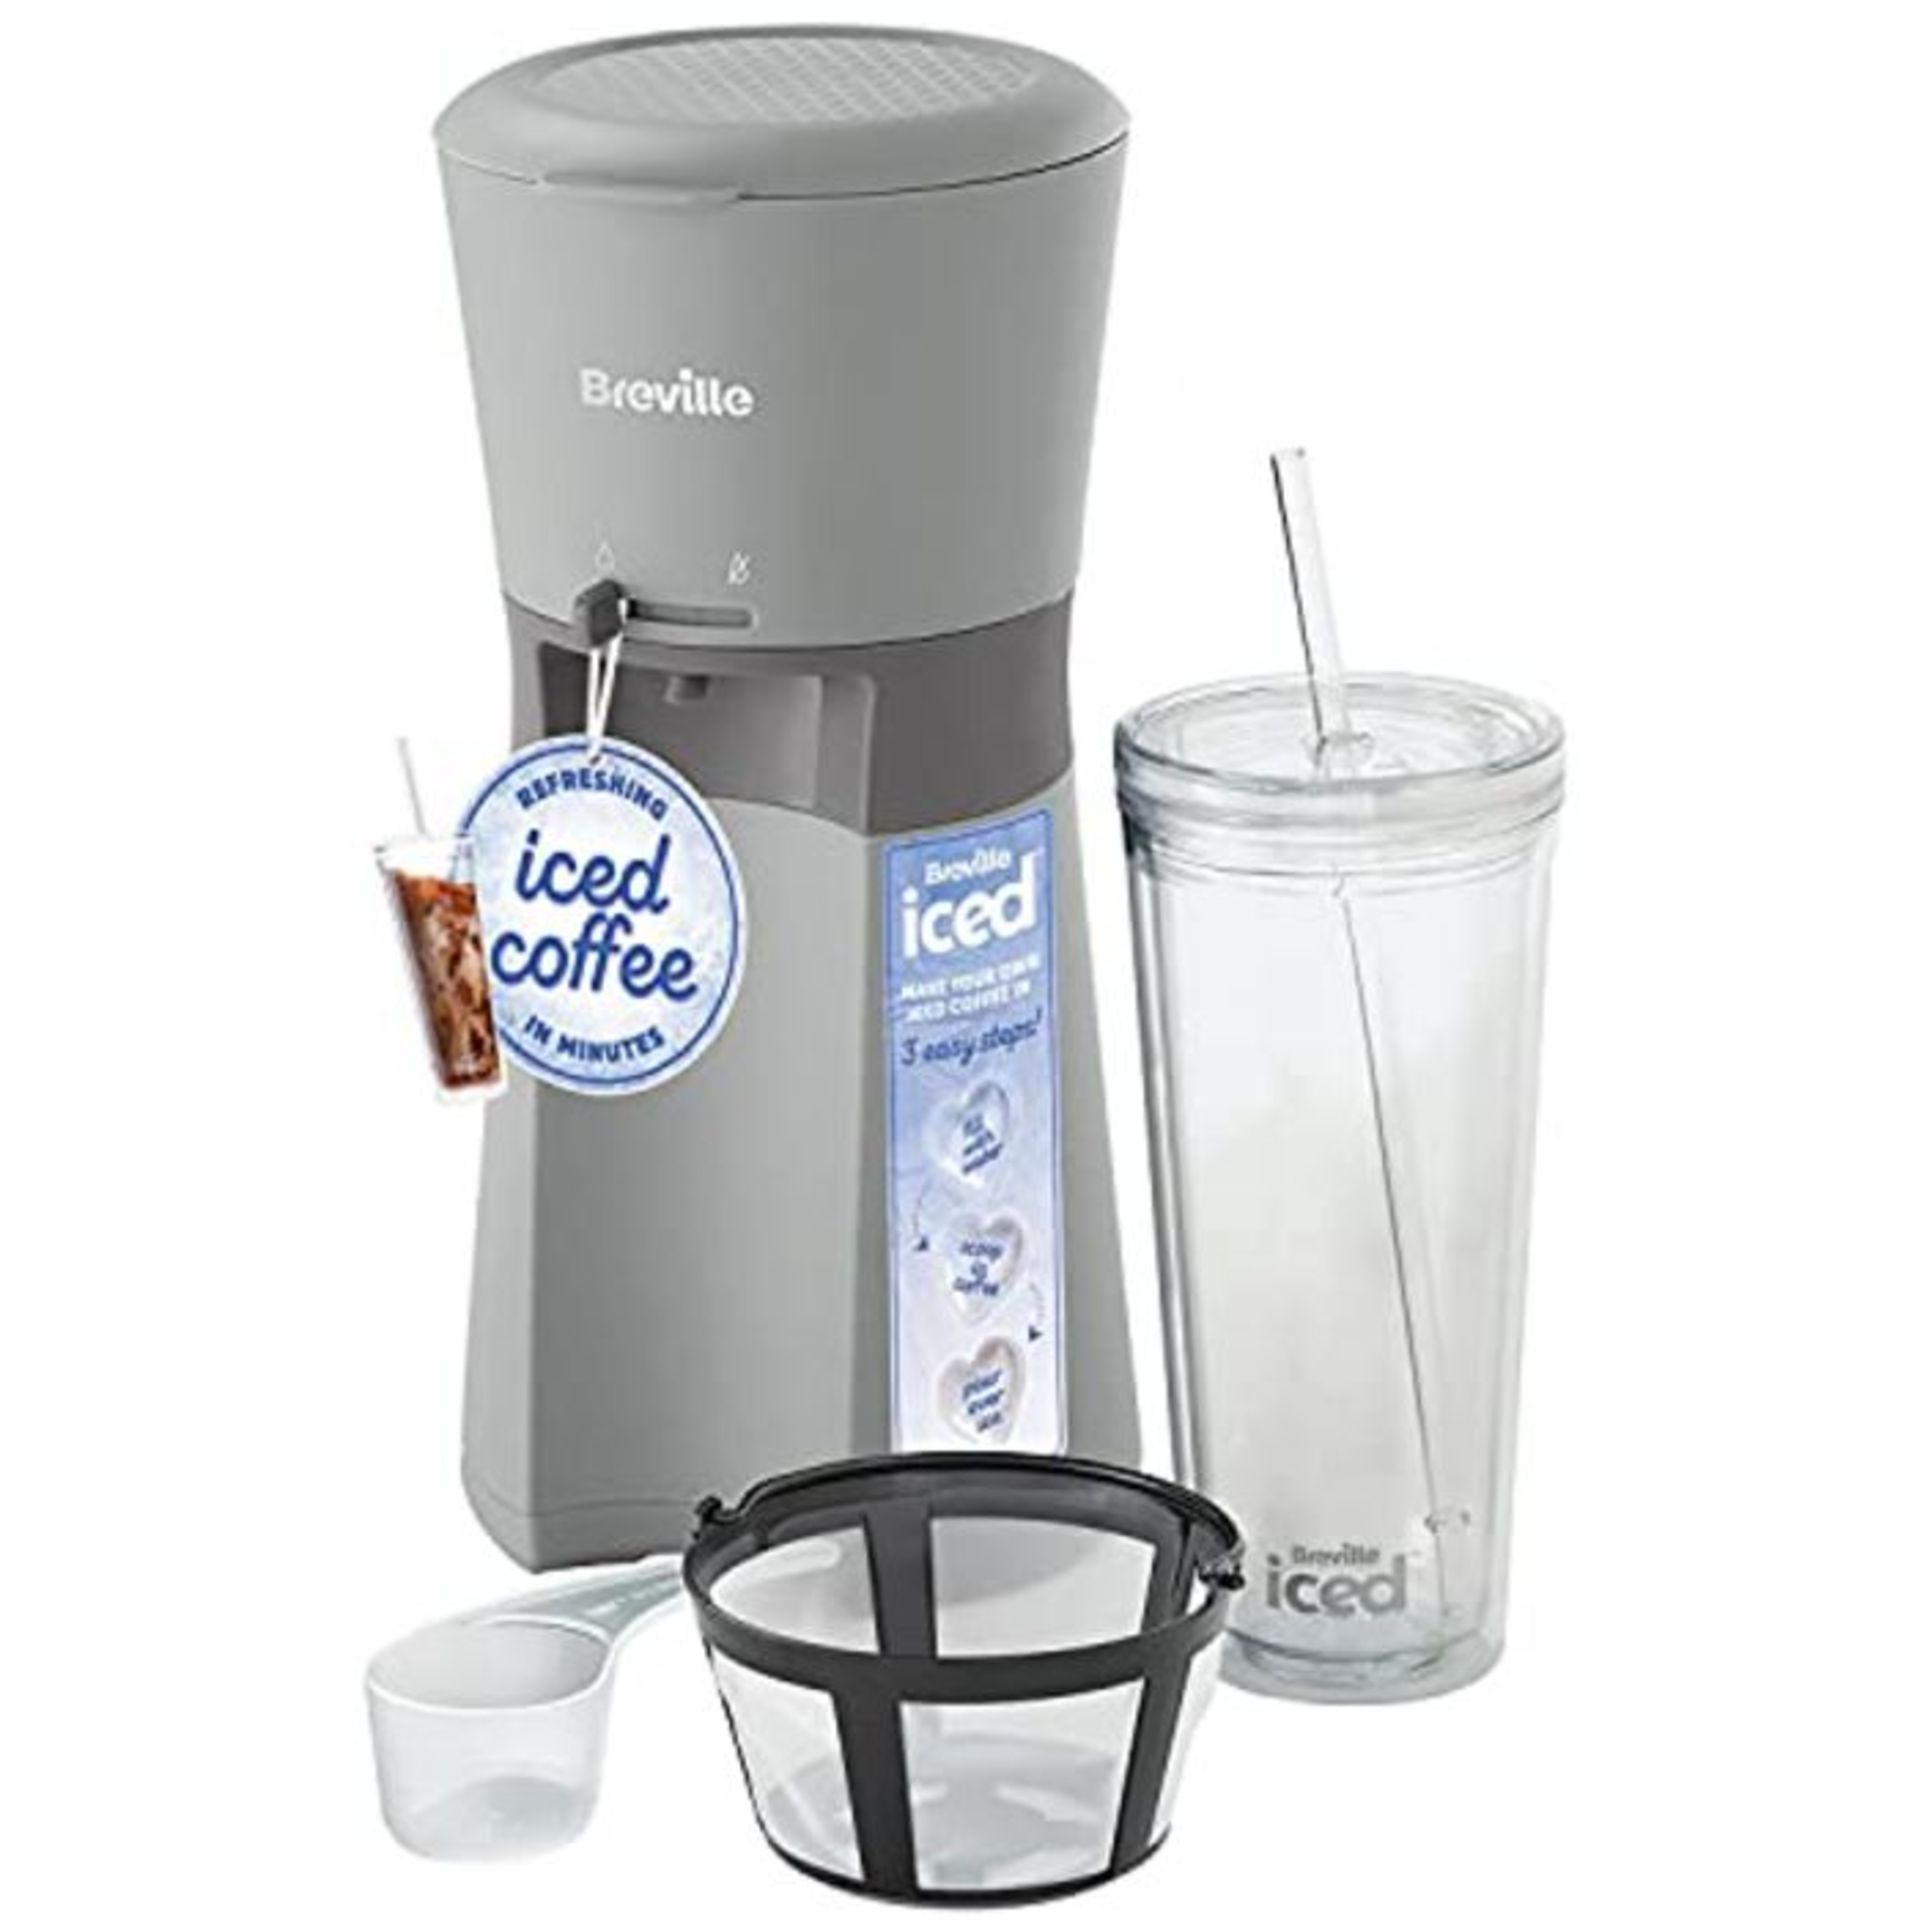 Breville Iced Coffee Maker | Plus Coffee Cup with Straw | Ready in Under 4 Minutes | G